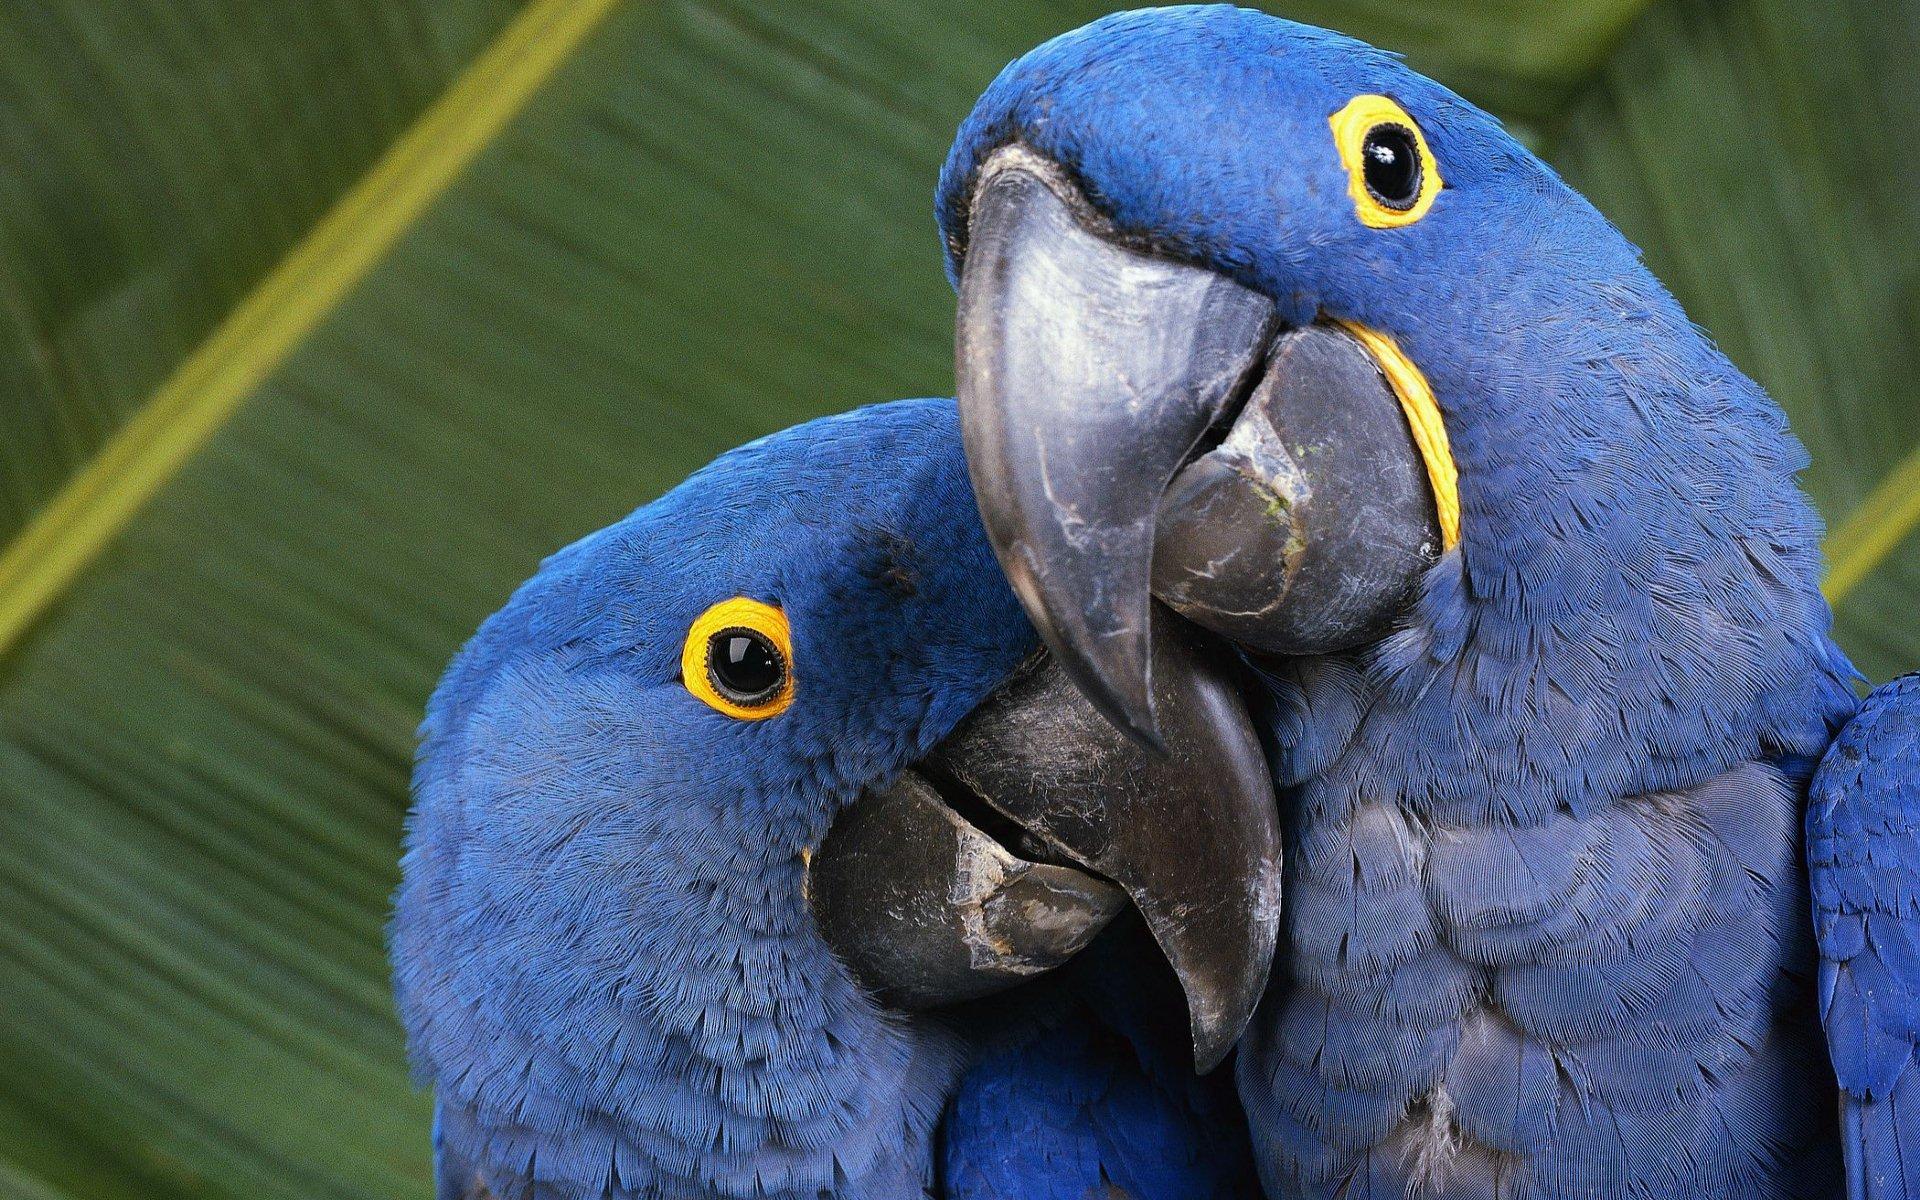 Wallpaper Birds, Parrots, Hyacinth Macaw, Blue and Yellow Macaw, Macaw,  Background - Download Free Image